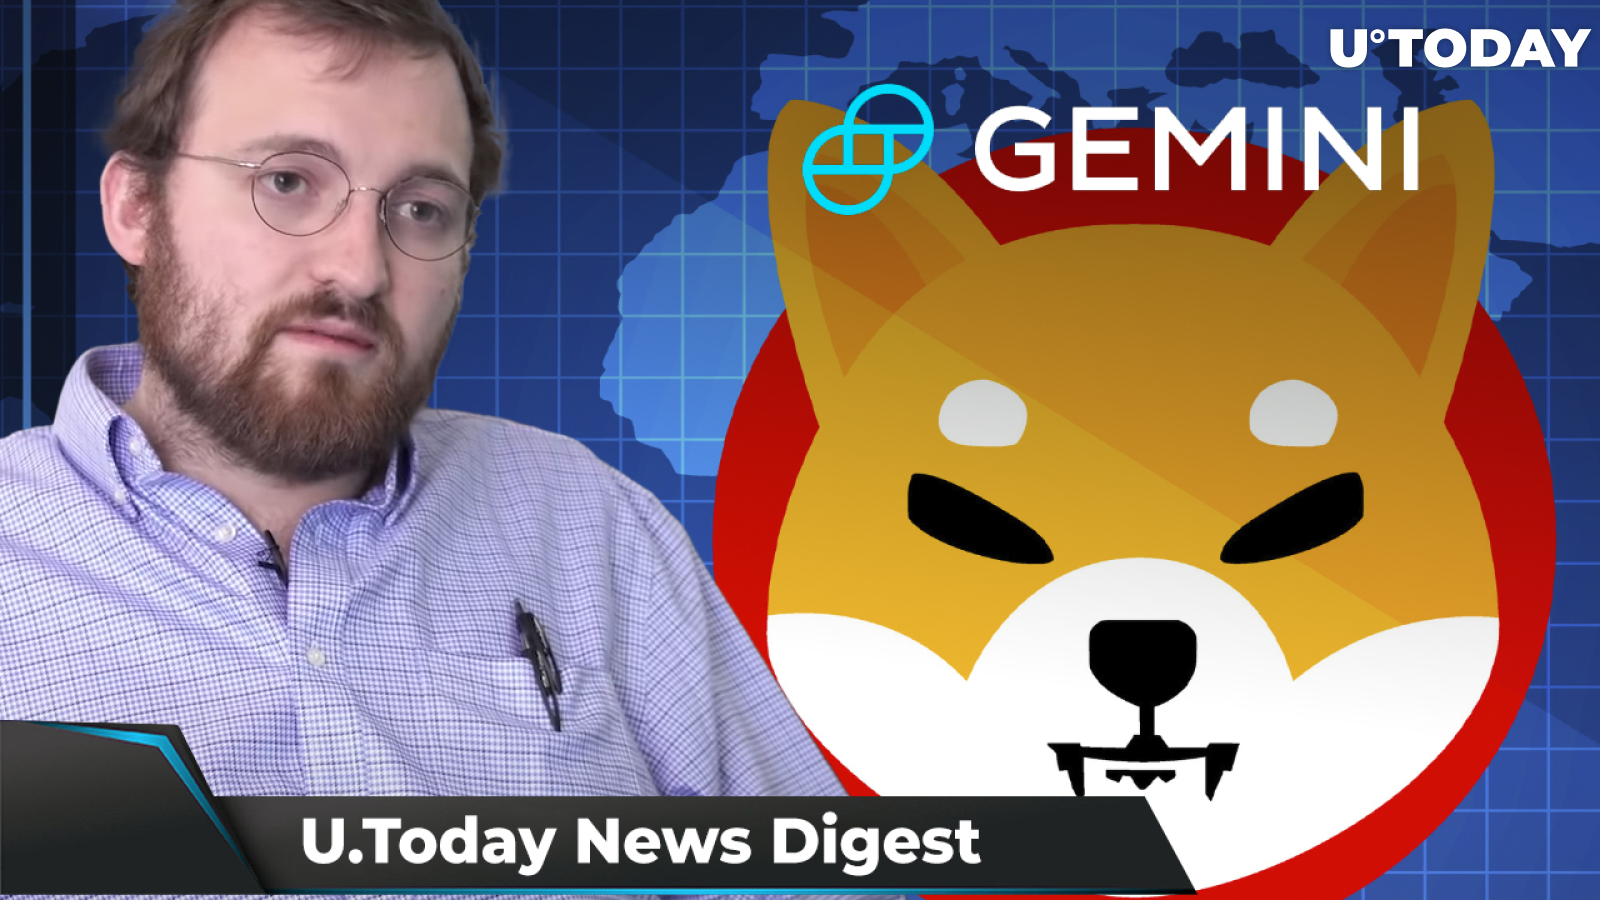 Gemini Lists SHIB, Hoskinson Teases Cardano 2022 Roadmap, New Bitcoin ETF to Be Listed on November 16: Crypto News Digest by U.Today